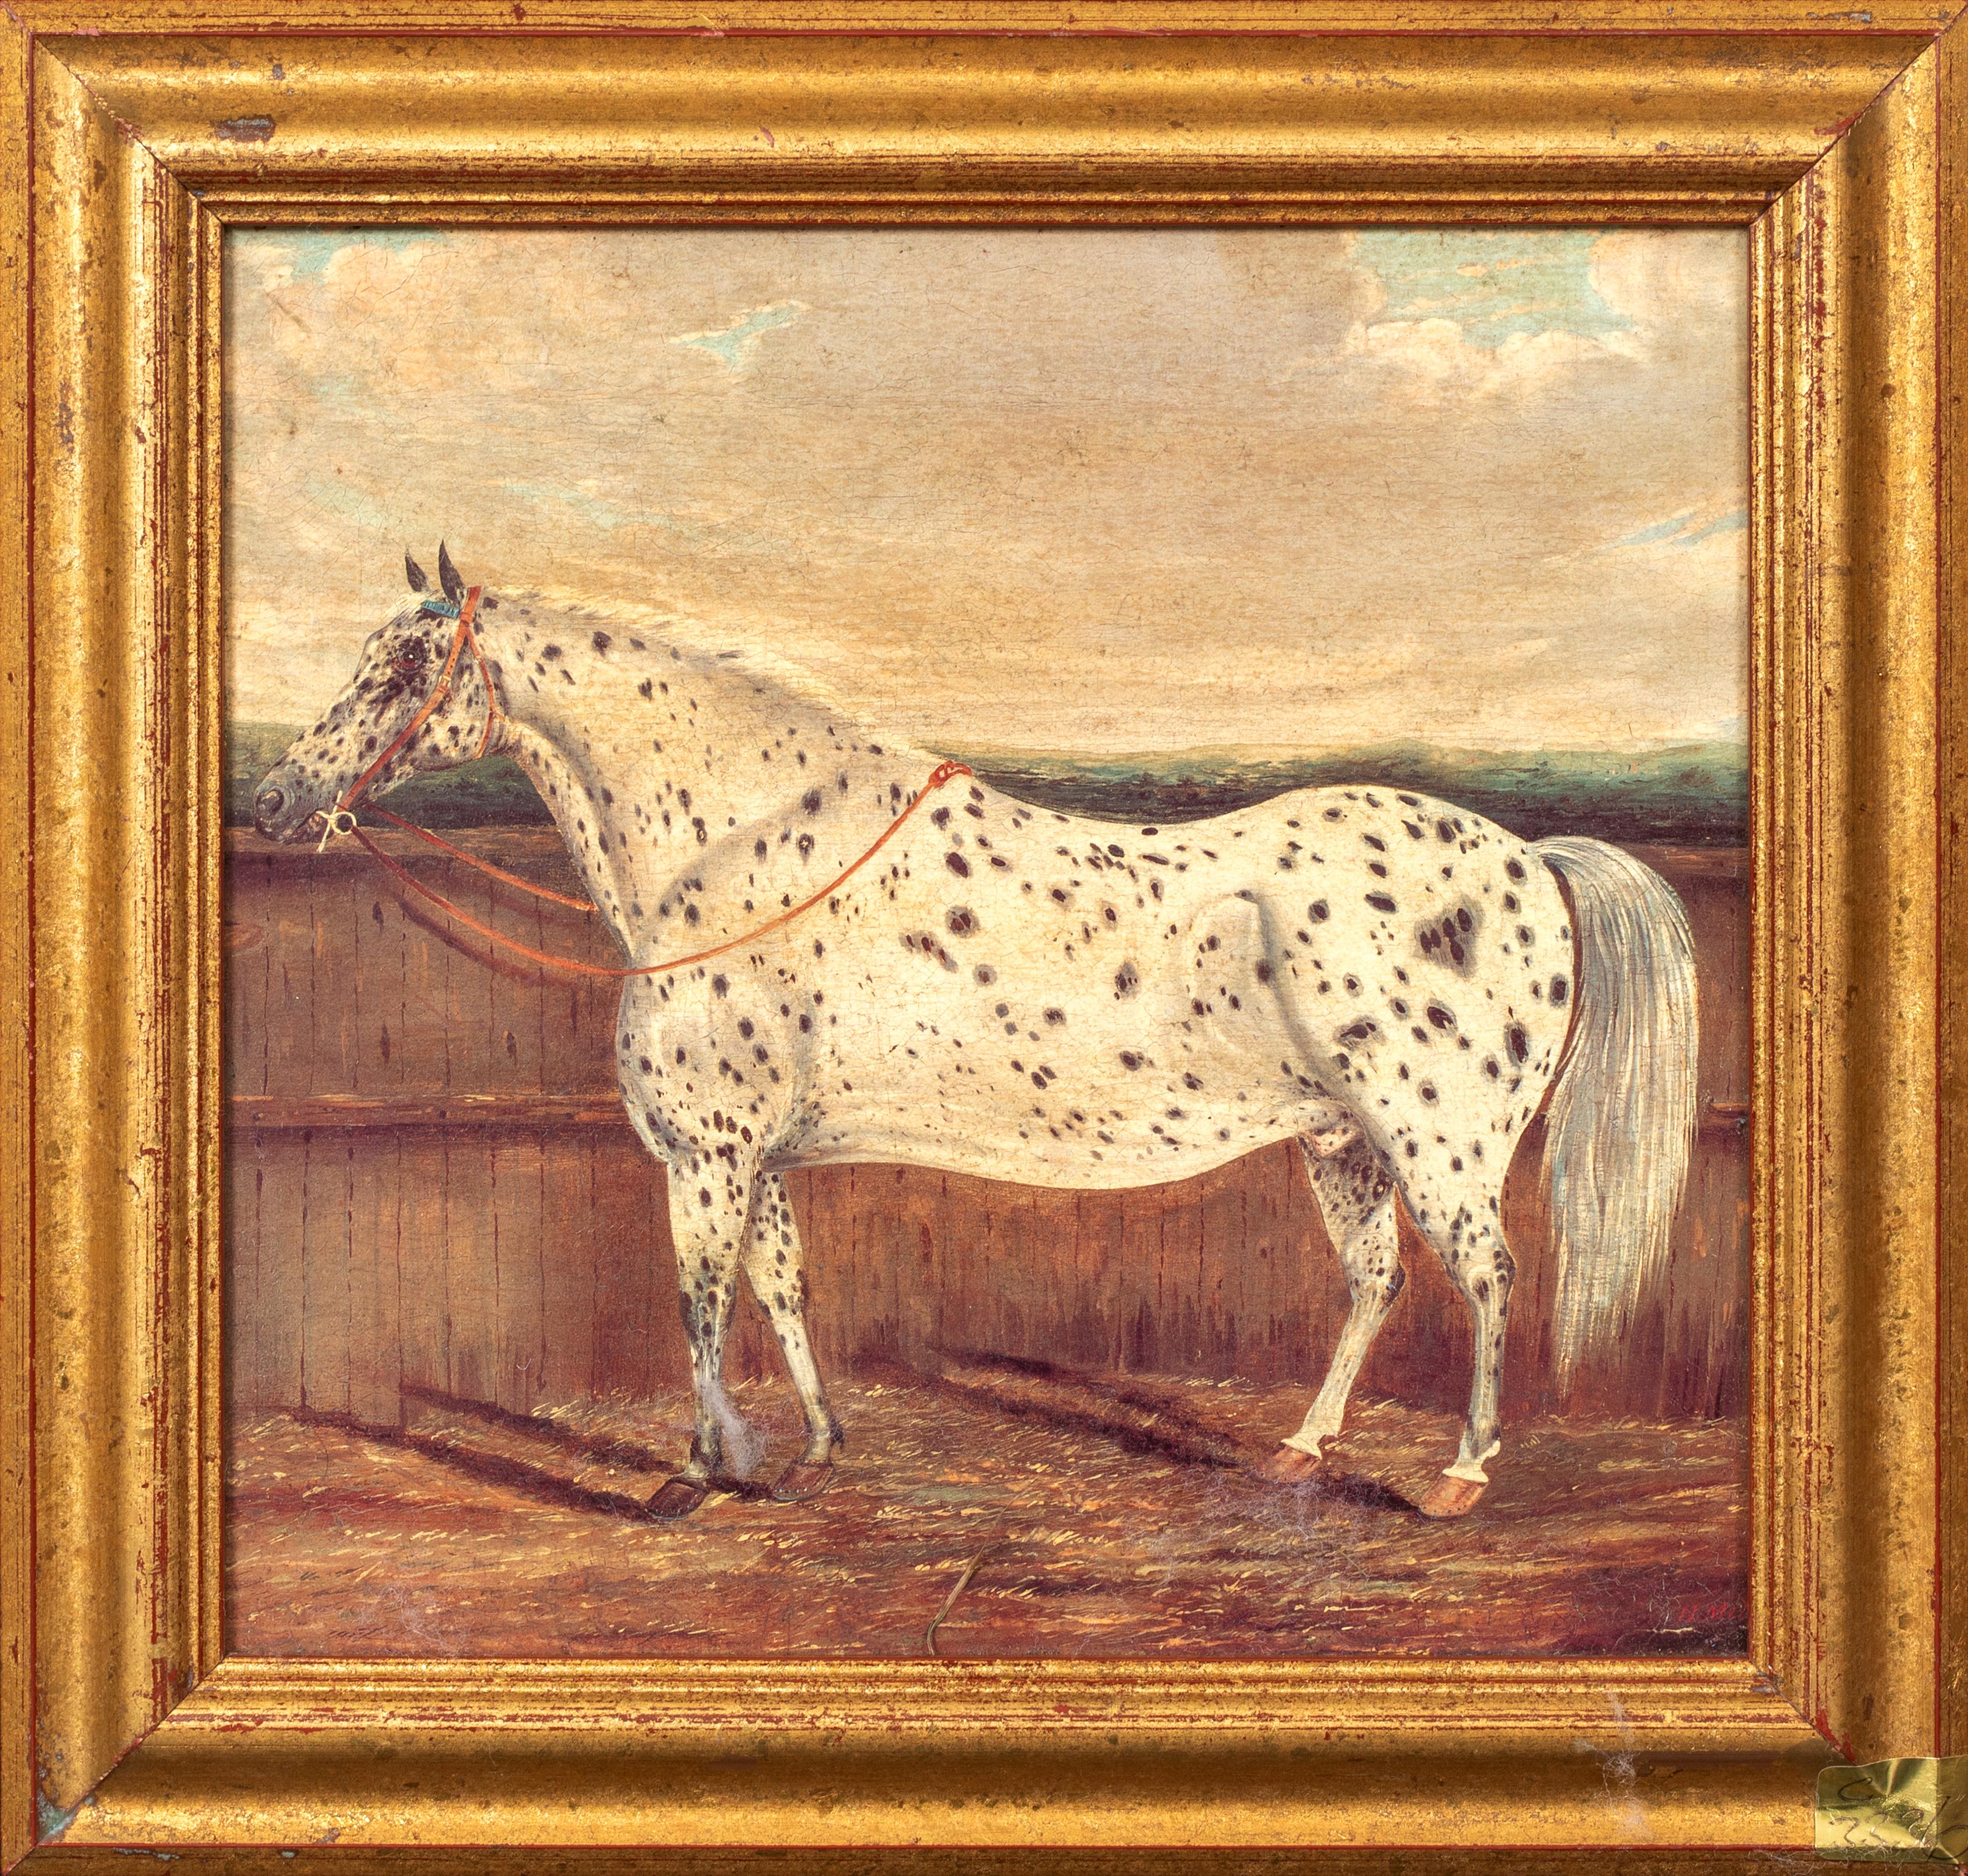 Unknown Animal Painting - Study of An Appaloosa Horse, 19th Century  by H Milnes (19th Century British)